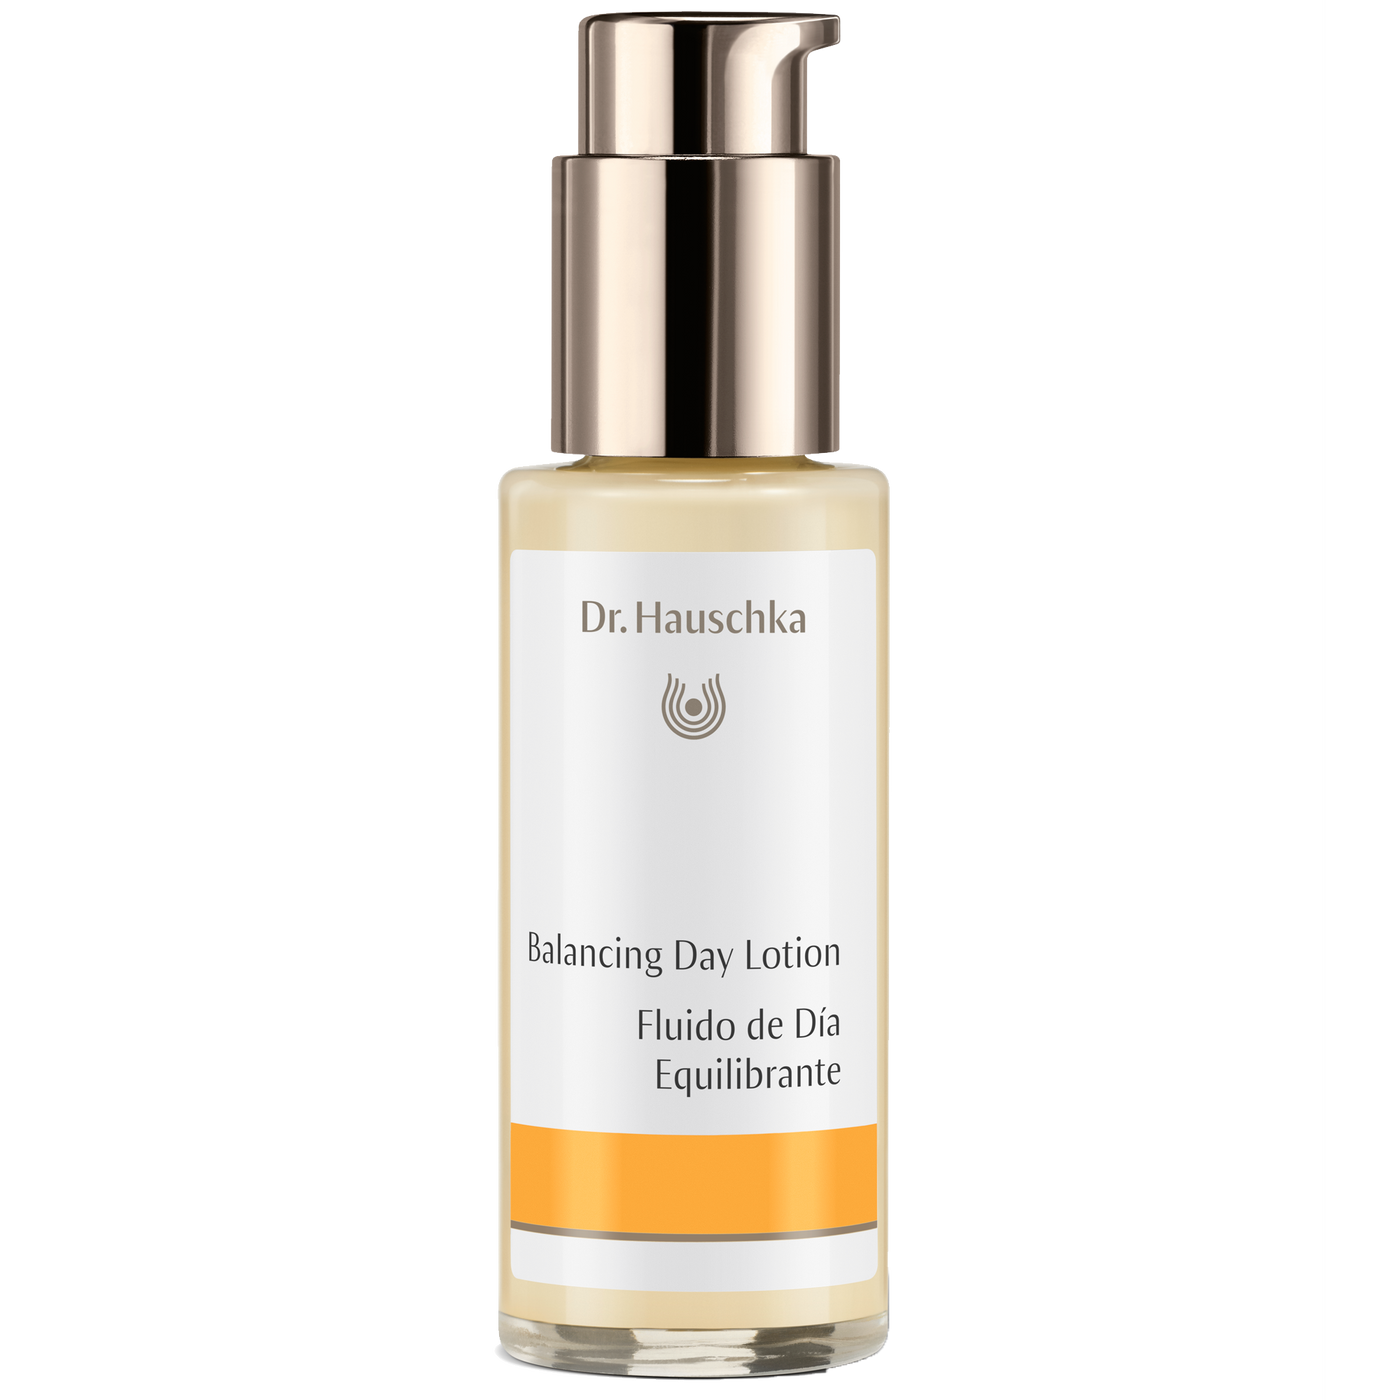 Balancing Day Lotion 1.7 fl oz Curated Wellness